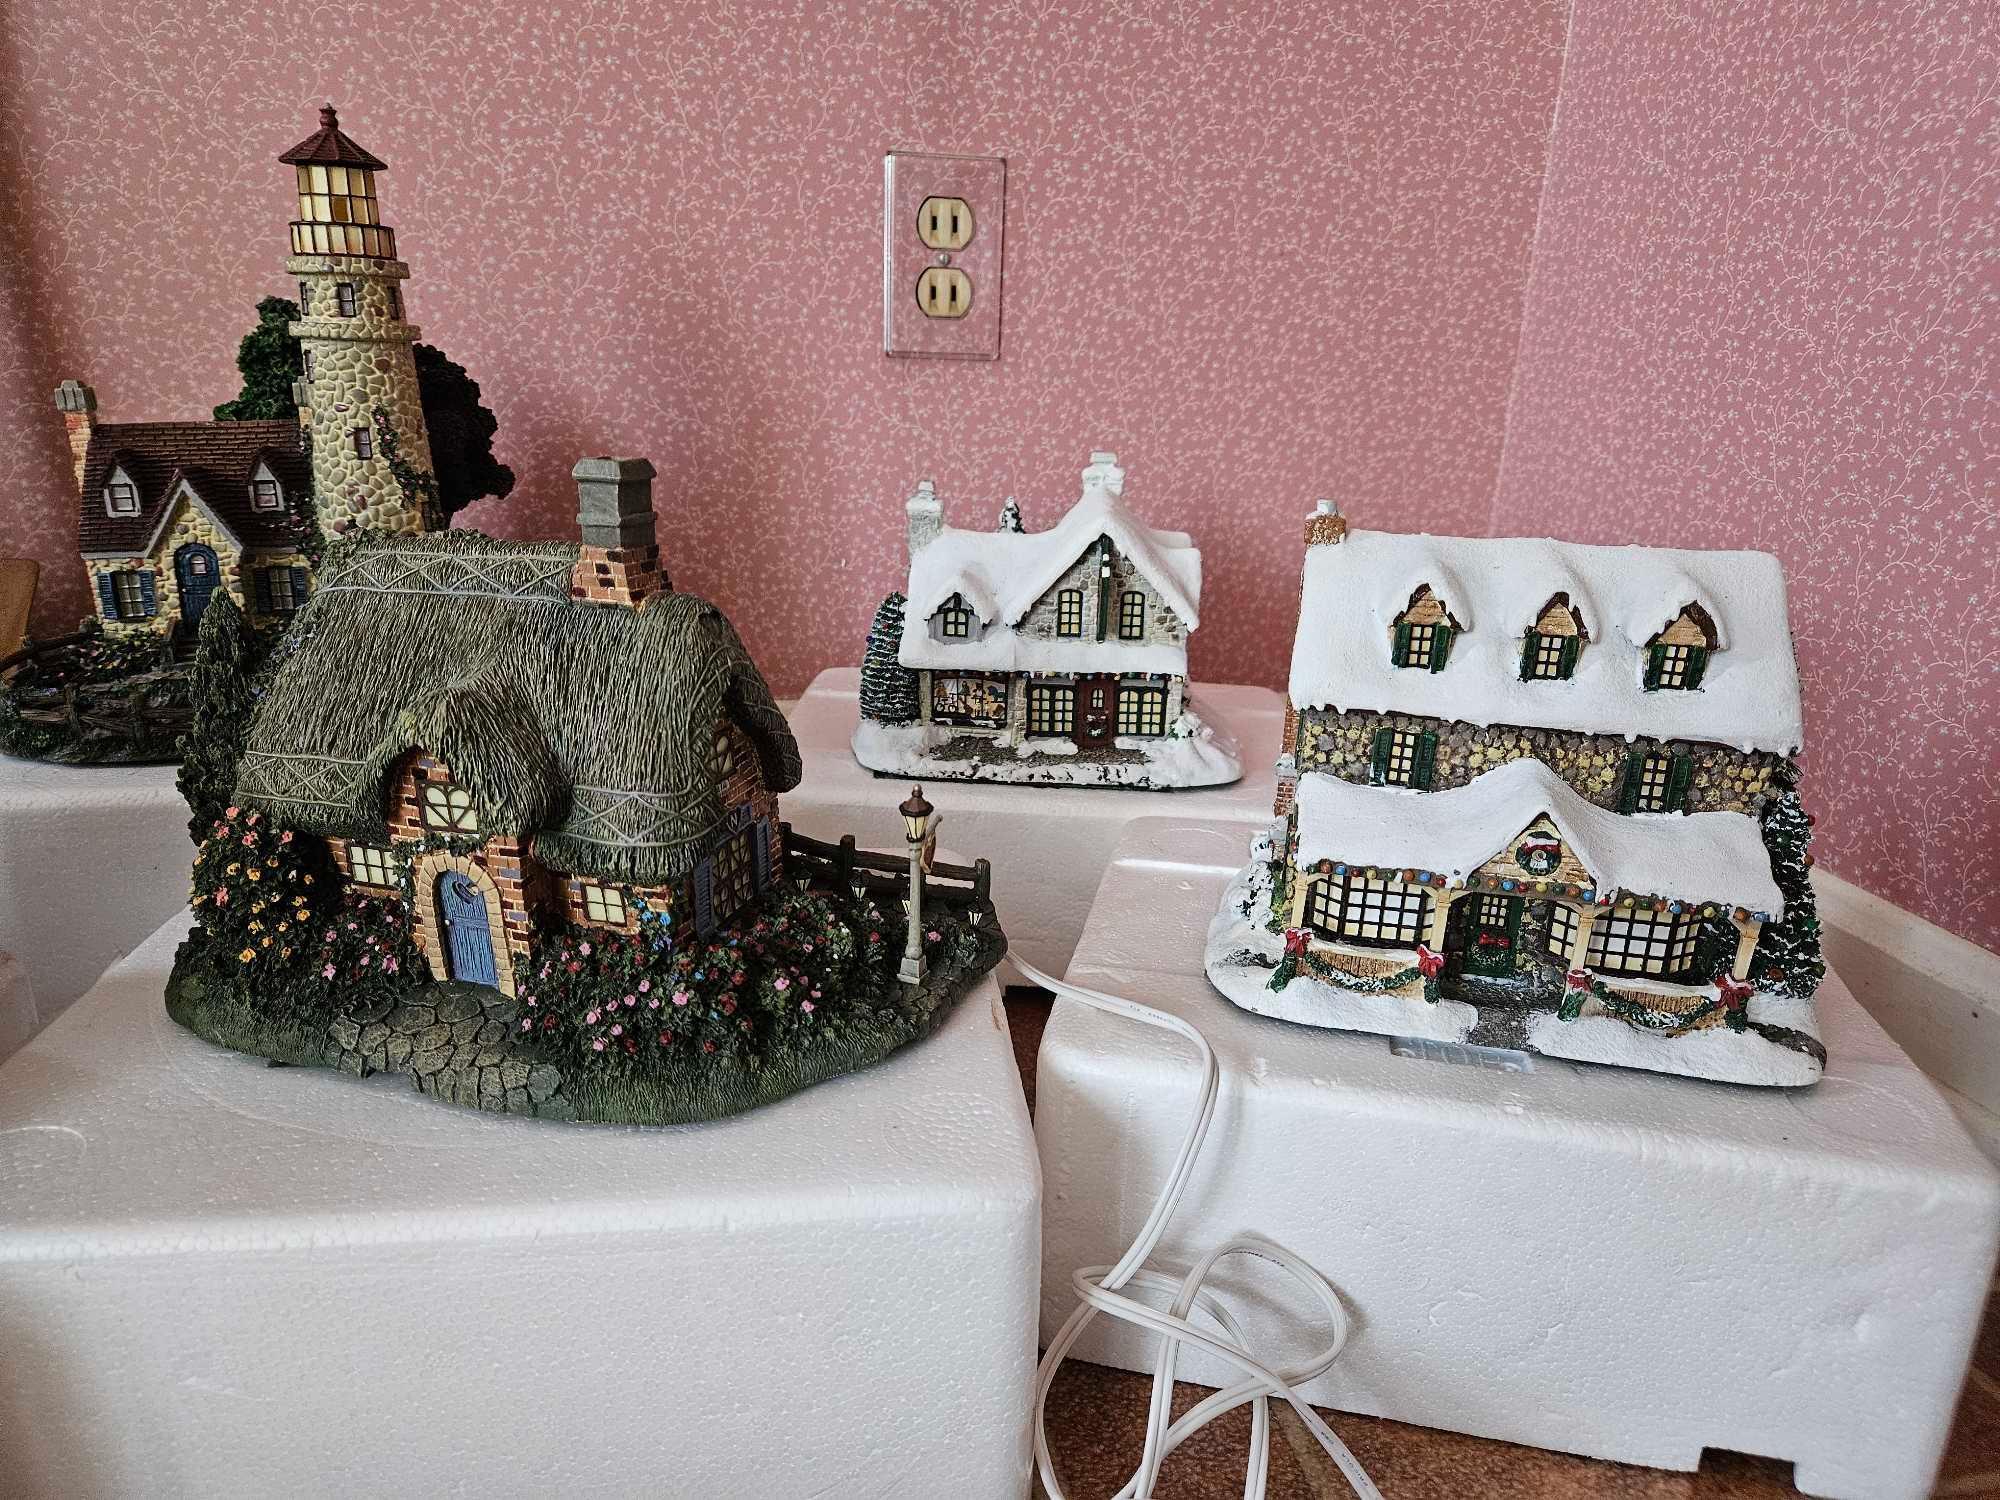 Assortment of Christmas Items and Village